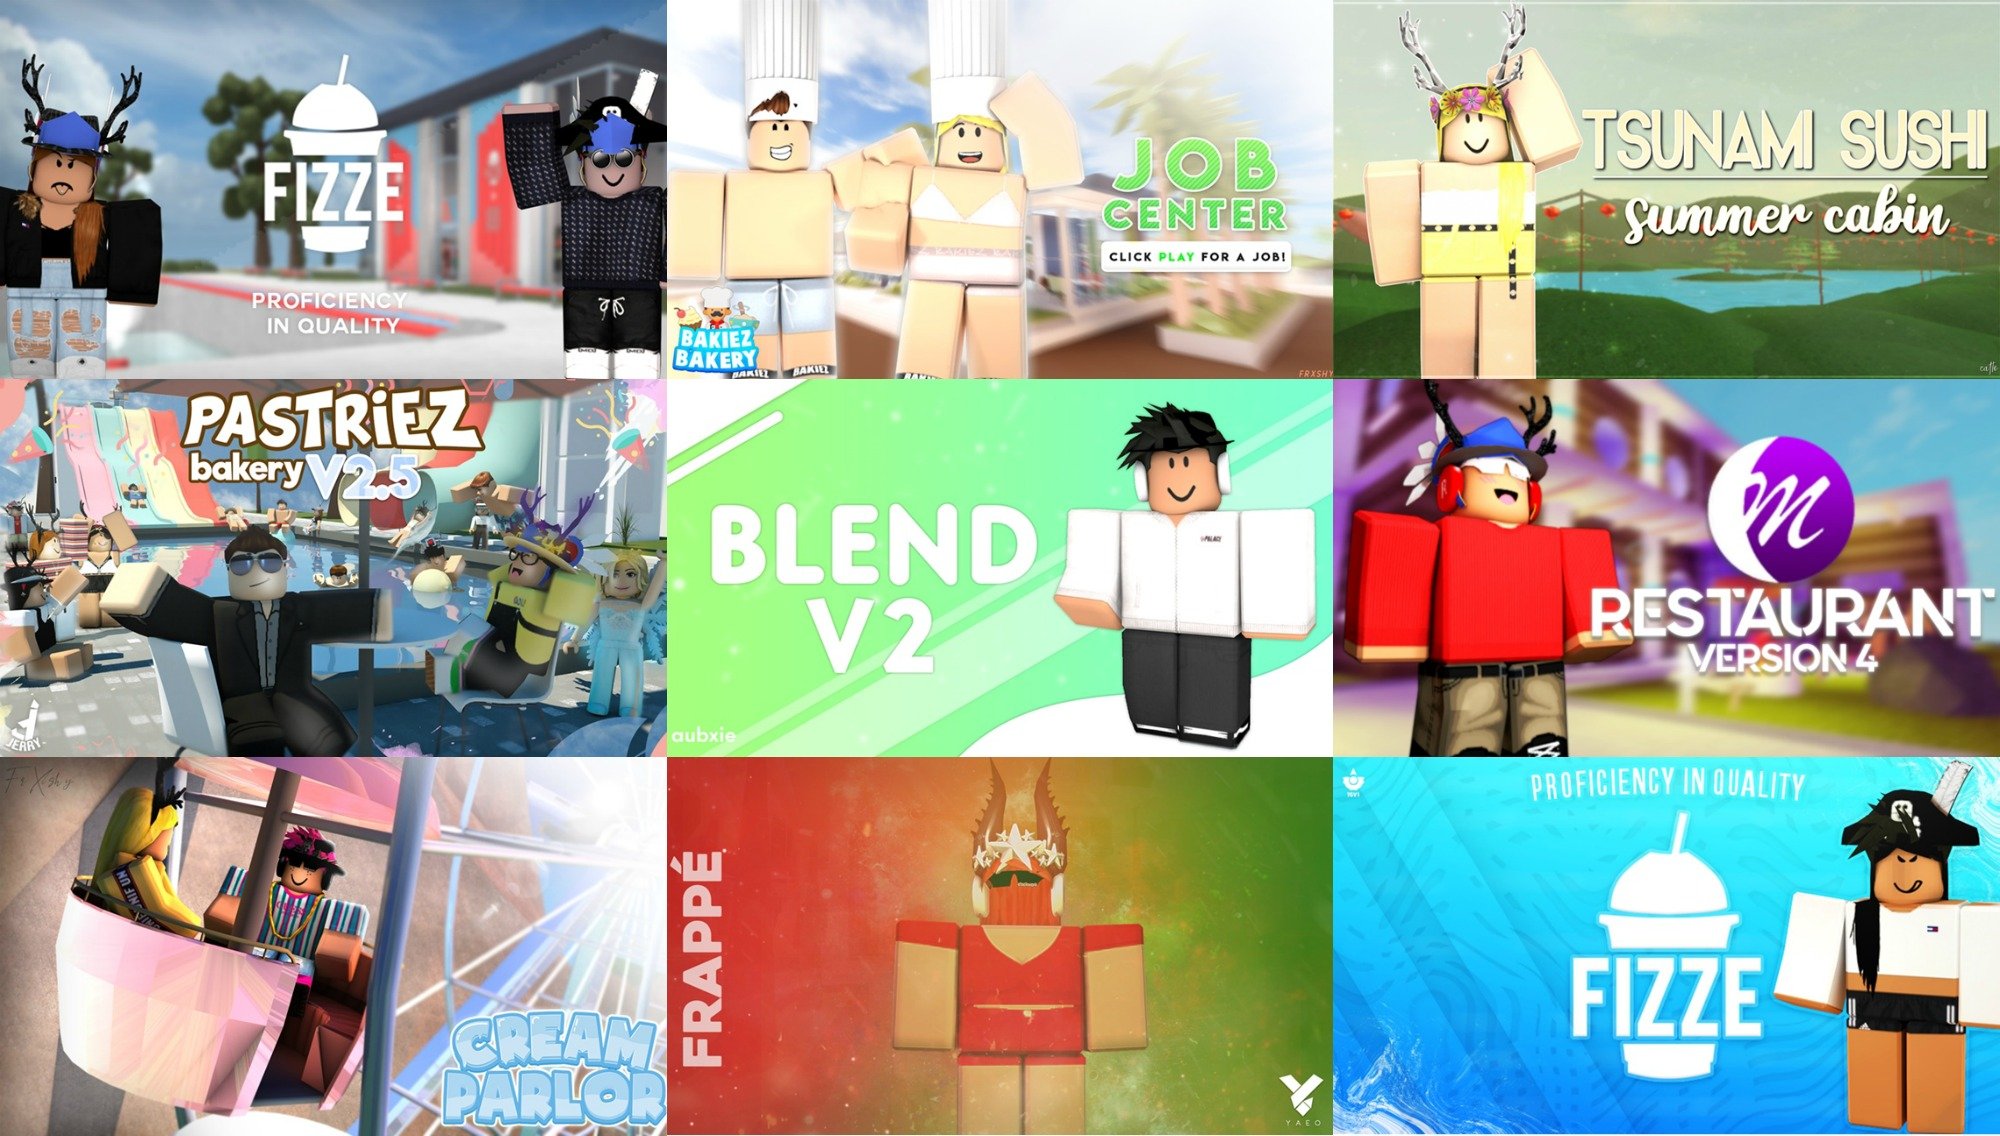 Lord Cowcow On Twitter I Will Never Understand Why Roblox Cafes Like To Use Thumbnails That Have These Random Characters Wearing Trendy Roblox Items While Having Nothing That Relates To Their Actual - roblox frappe discord link